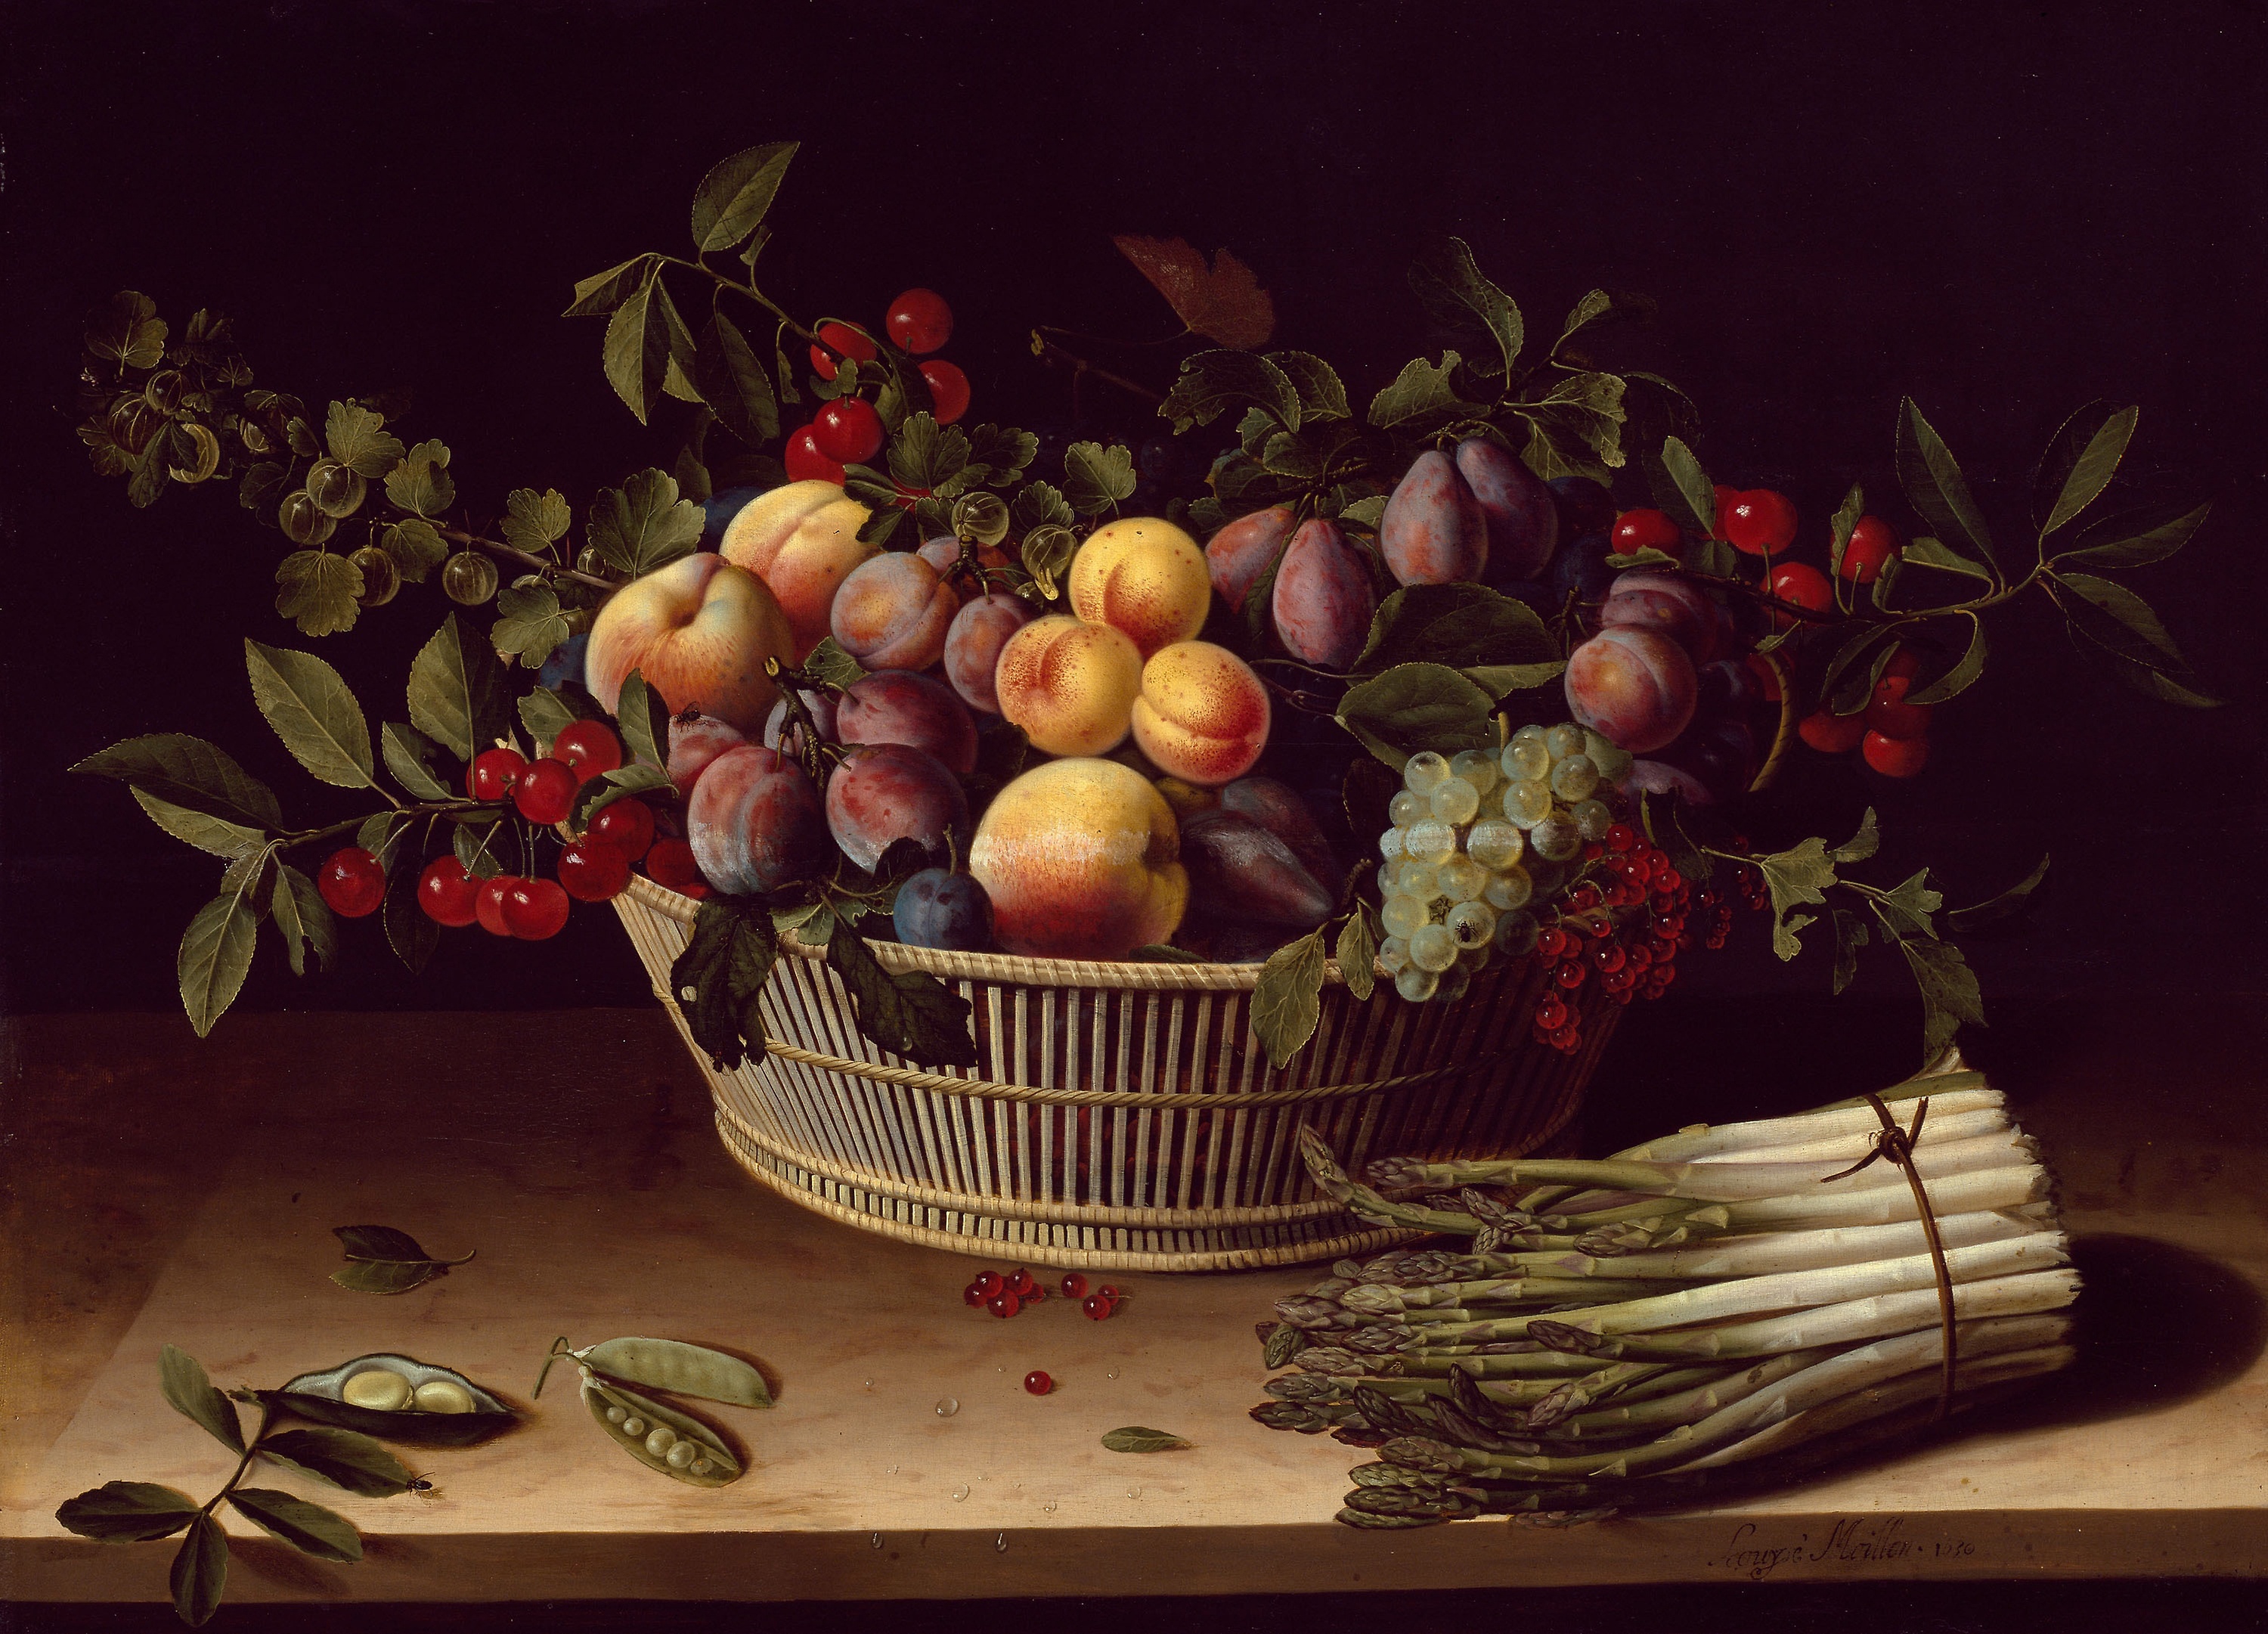 A still-life painting of a bowl of fruit on a table, with a large bunch of asparagus tied with a brown cord on the right hand side. The bowl of fruit is lush, filled with peaches, plums, grapes, cherries, and nectarines, as well as some green foliage. It rests on a simple wood table, set against a black background.